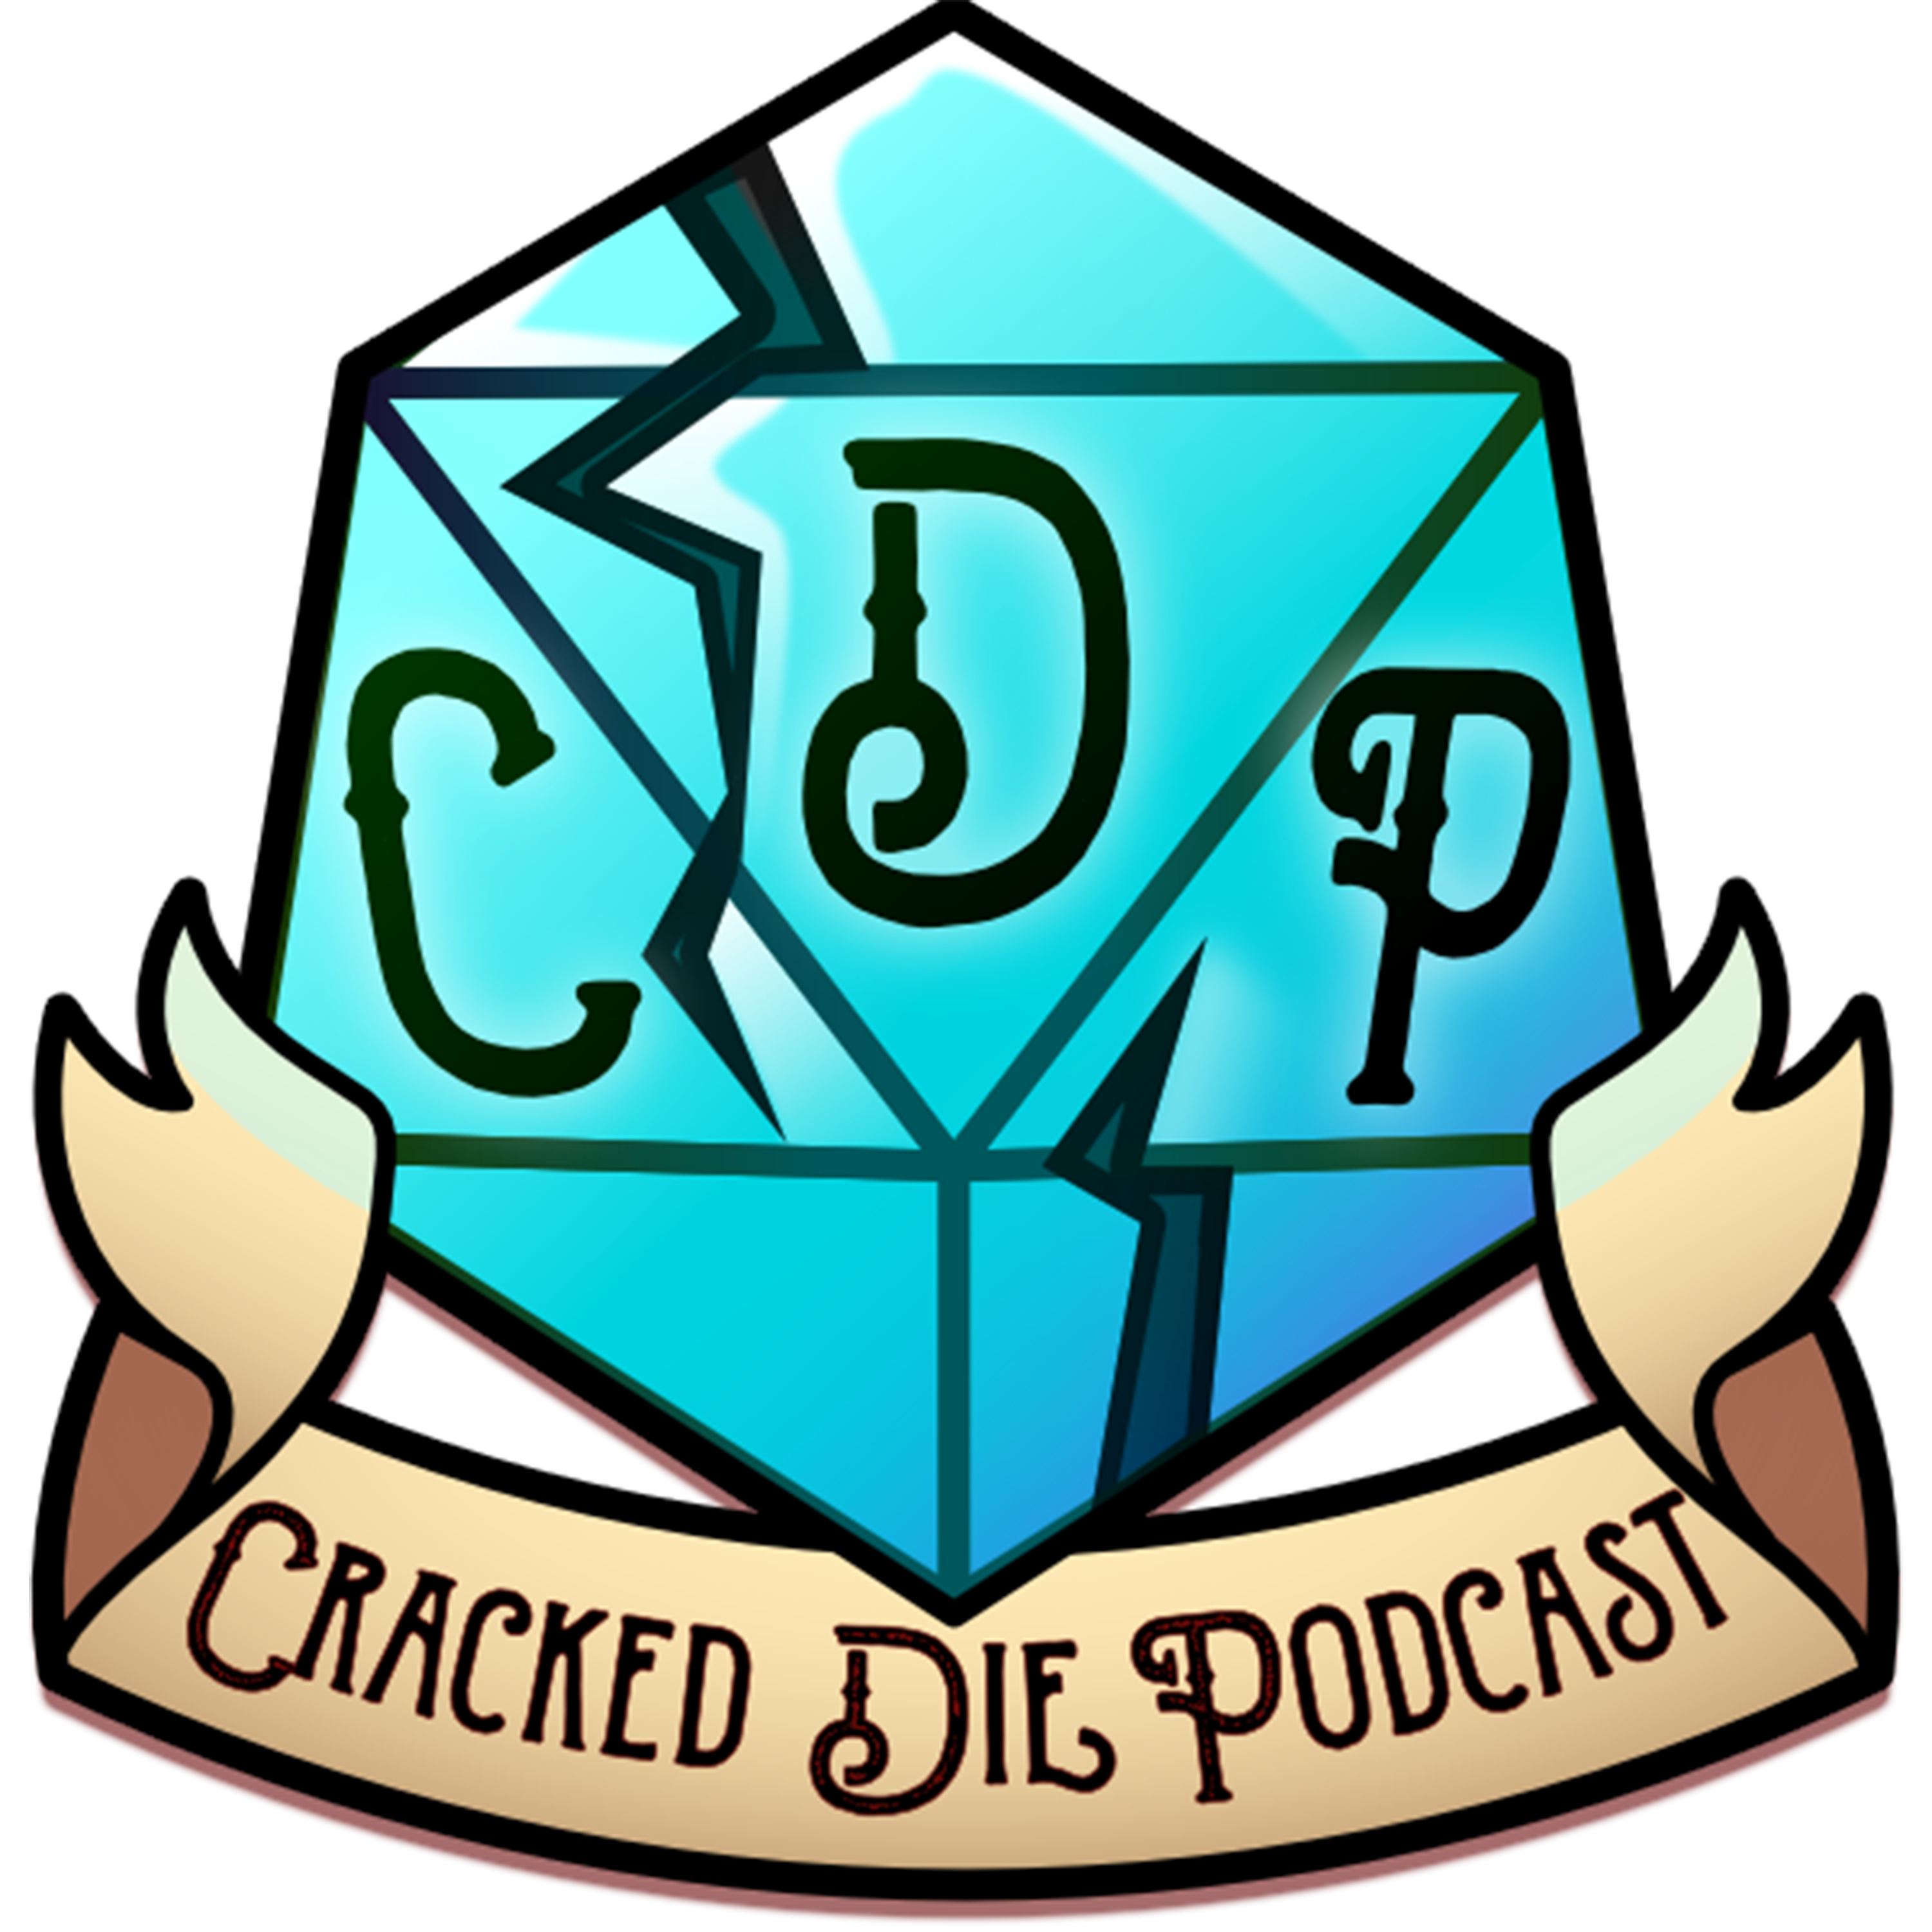 The Cracked Die Podcast - Episode 104 - Sea and Sand